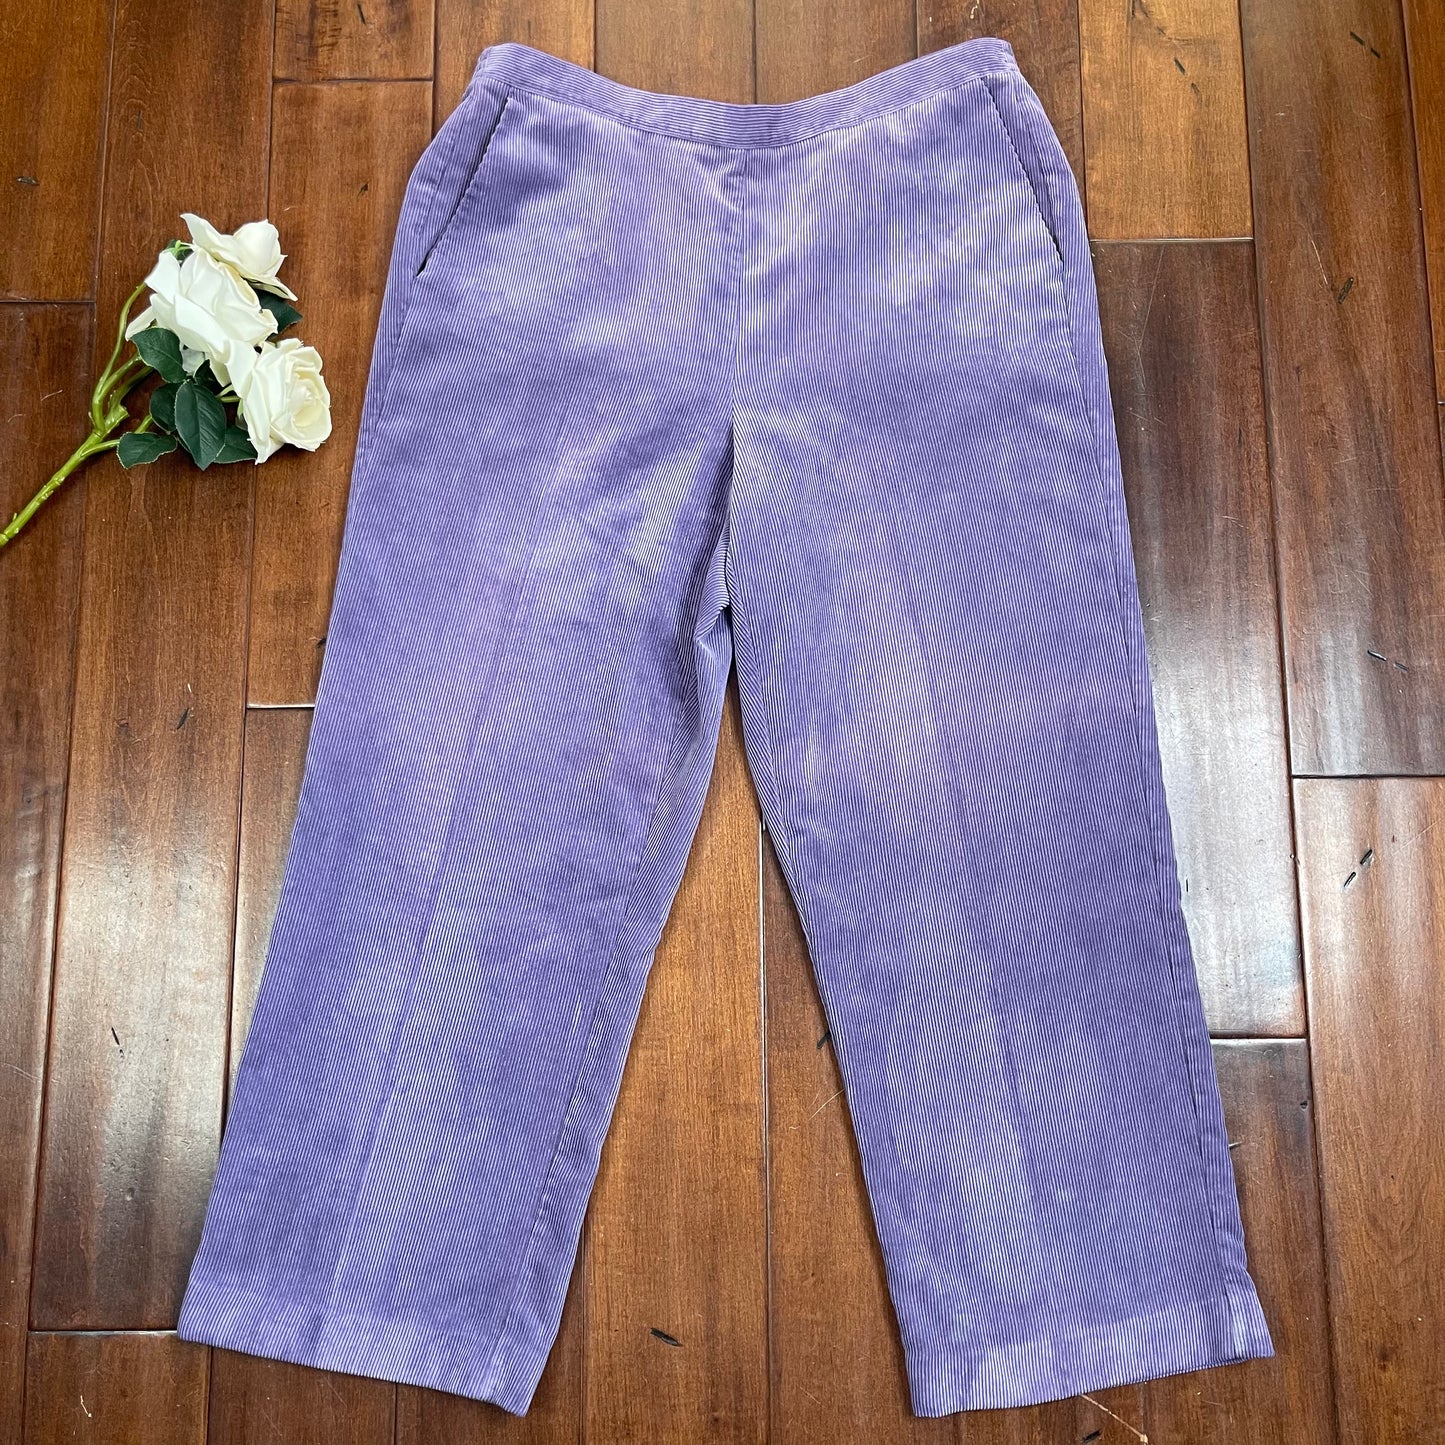 THRIFTED LILAC CORDUROY PANTS